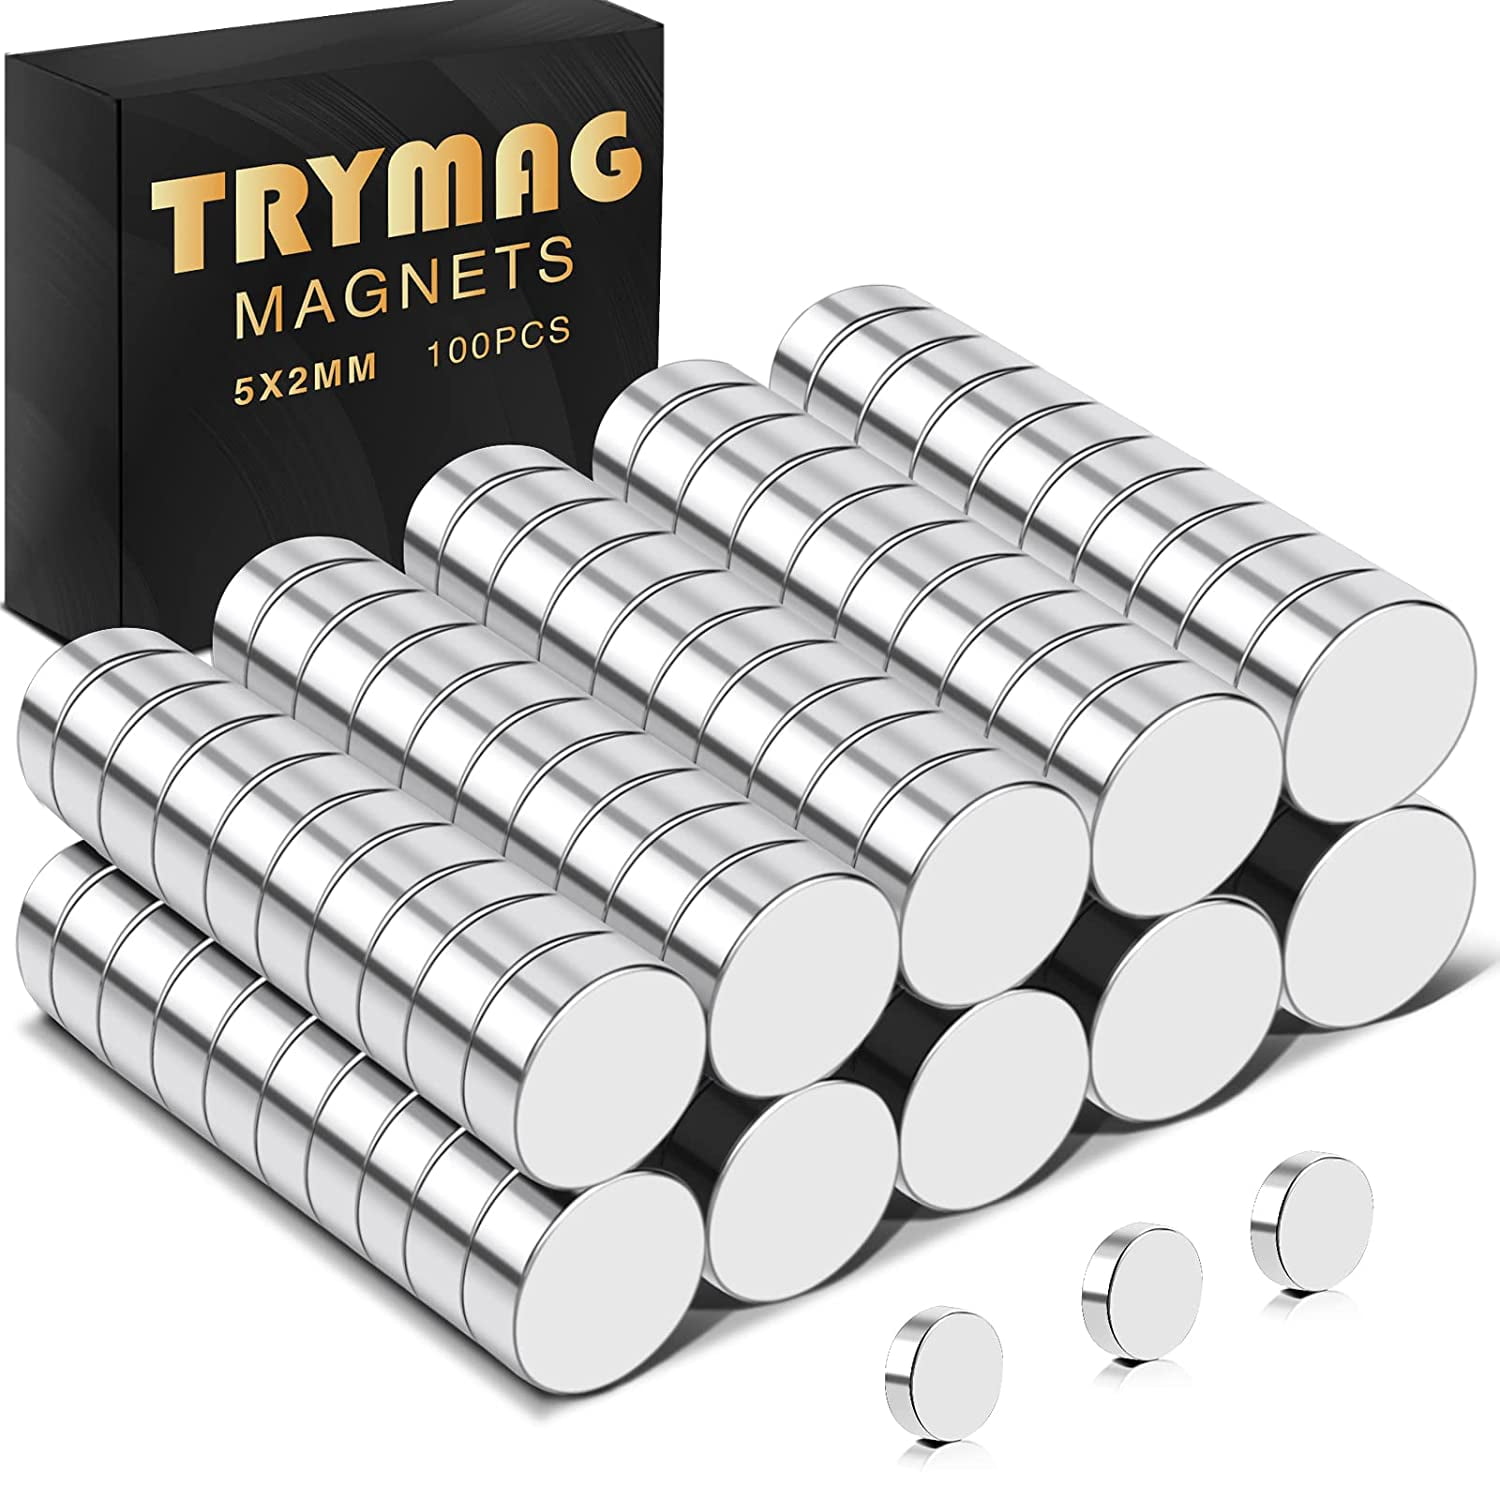 120Pcs Neodymium Magnet, 4mmx1.5mm Small Magnets Strong Rare Earth Magnets  Refrigerator Magnets for Crafts Dry Erase Board, Office Fridge Mini Round